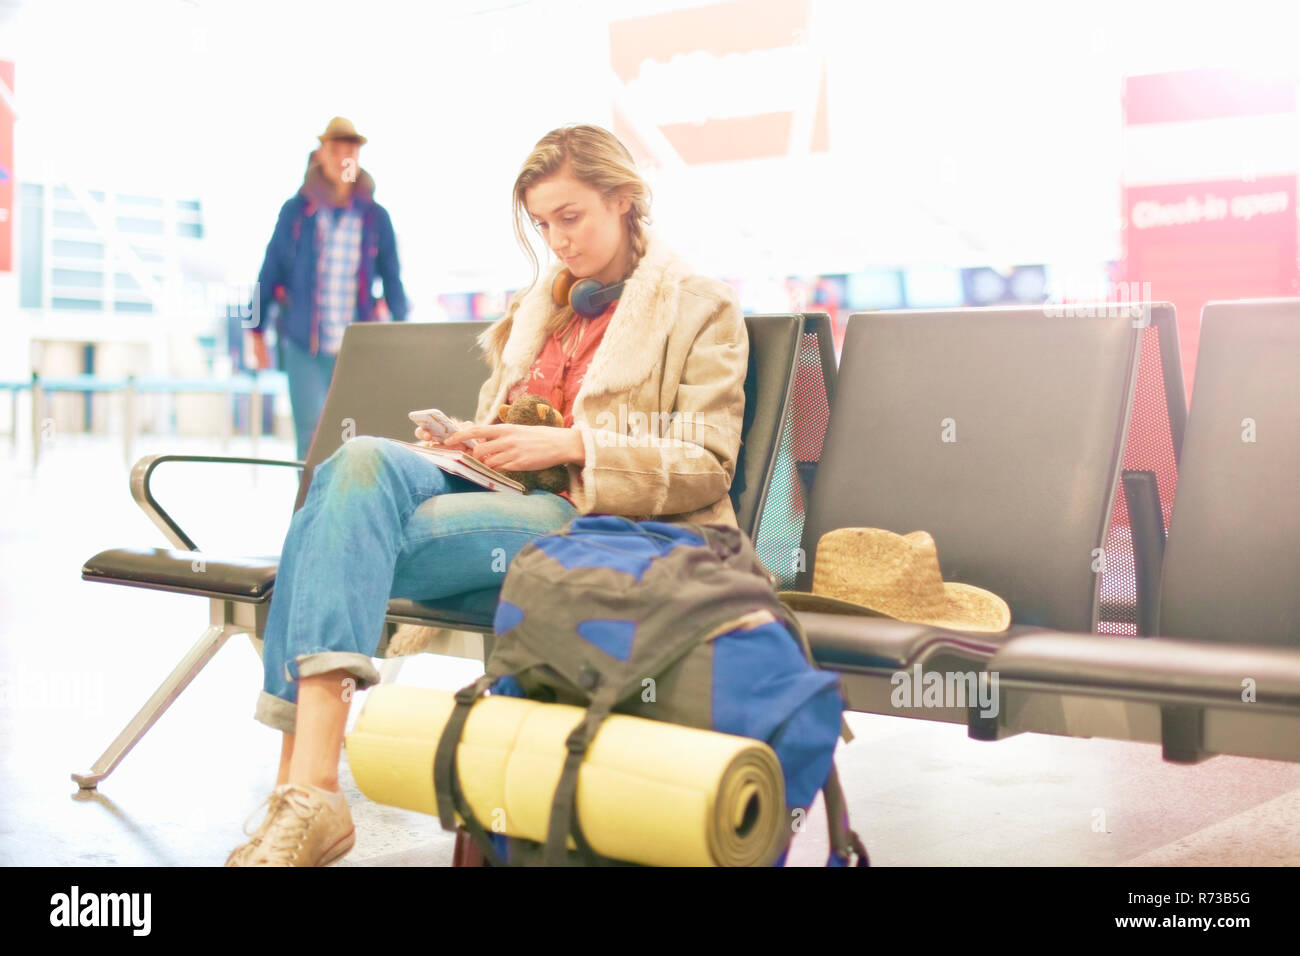 Young woman at airport, sitting with backpack beside her, using smartphone Stock Photo